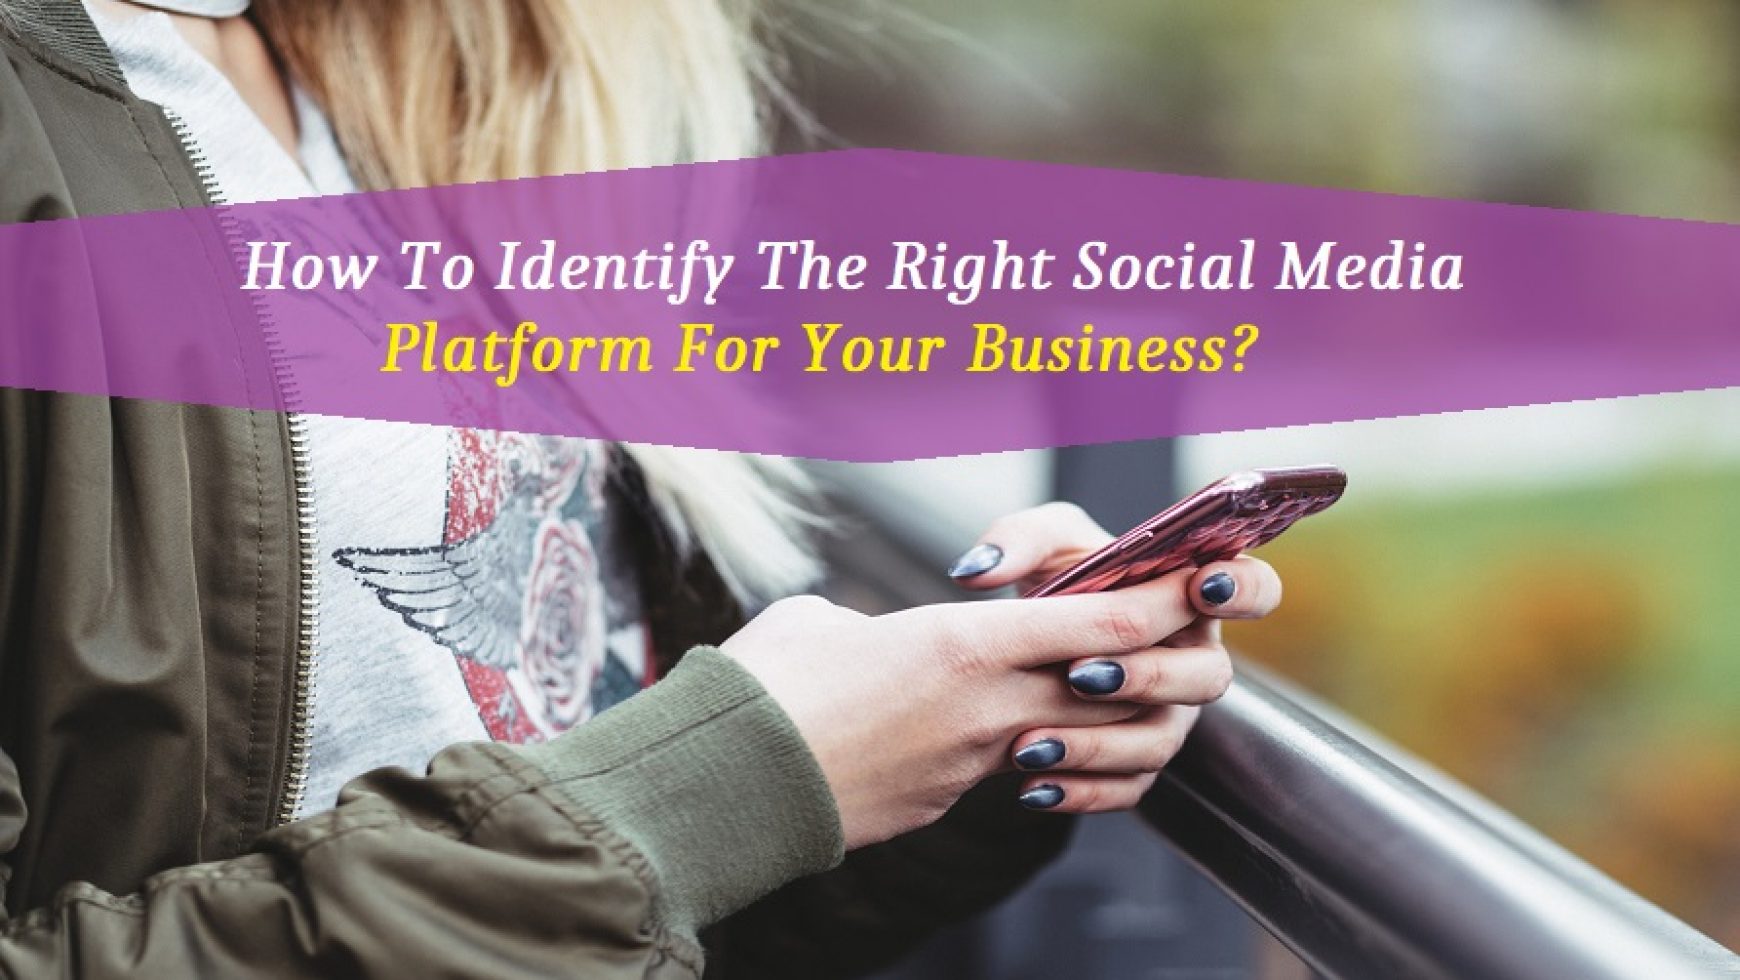 How To Identify The Right Social Media Platform For Your Business?